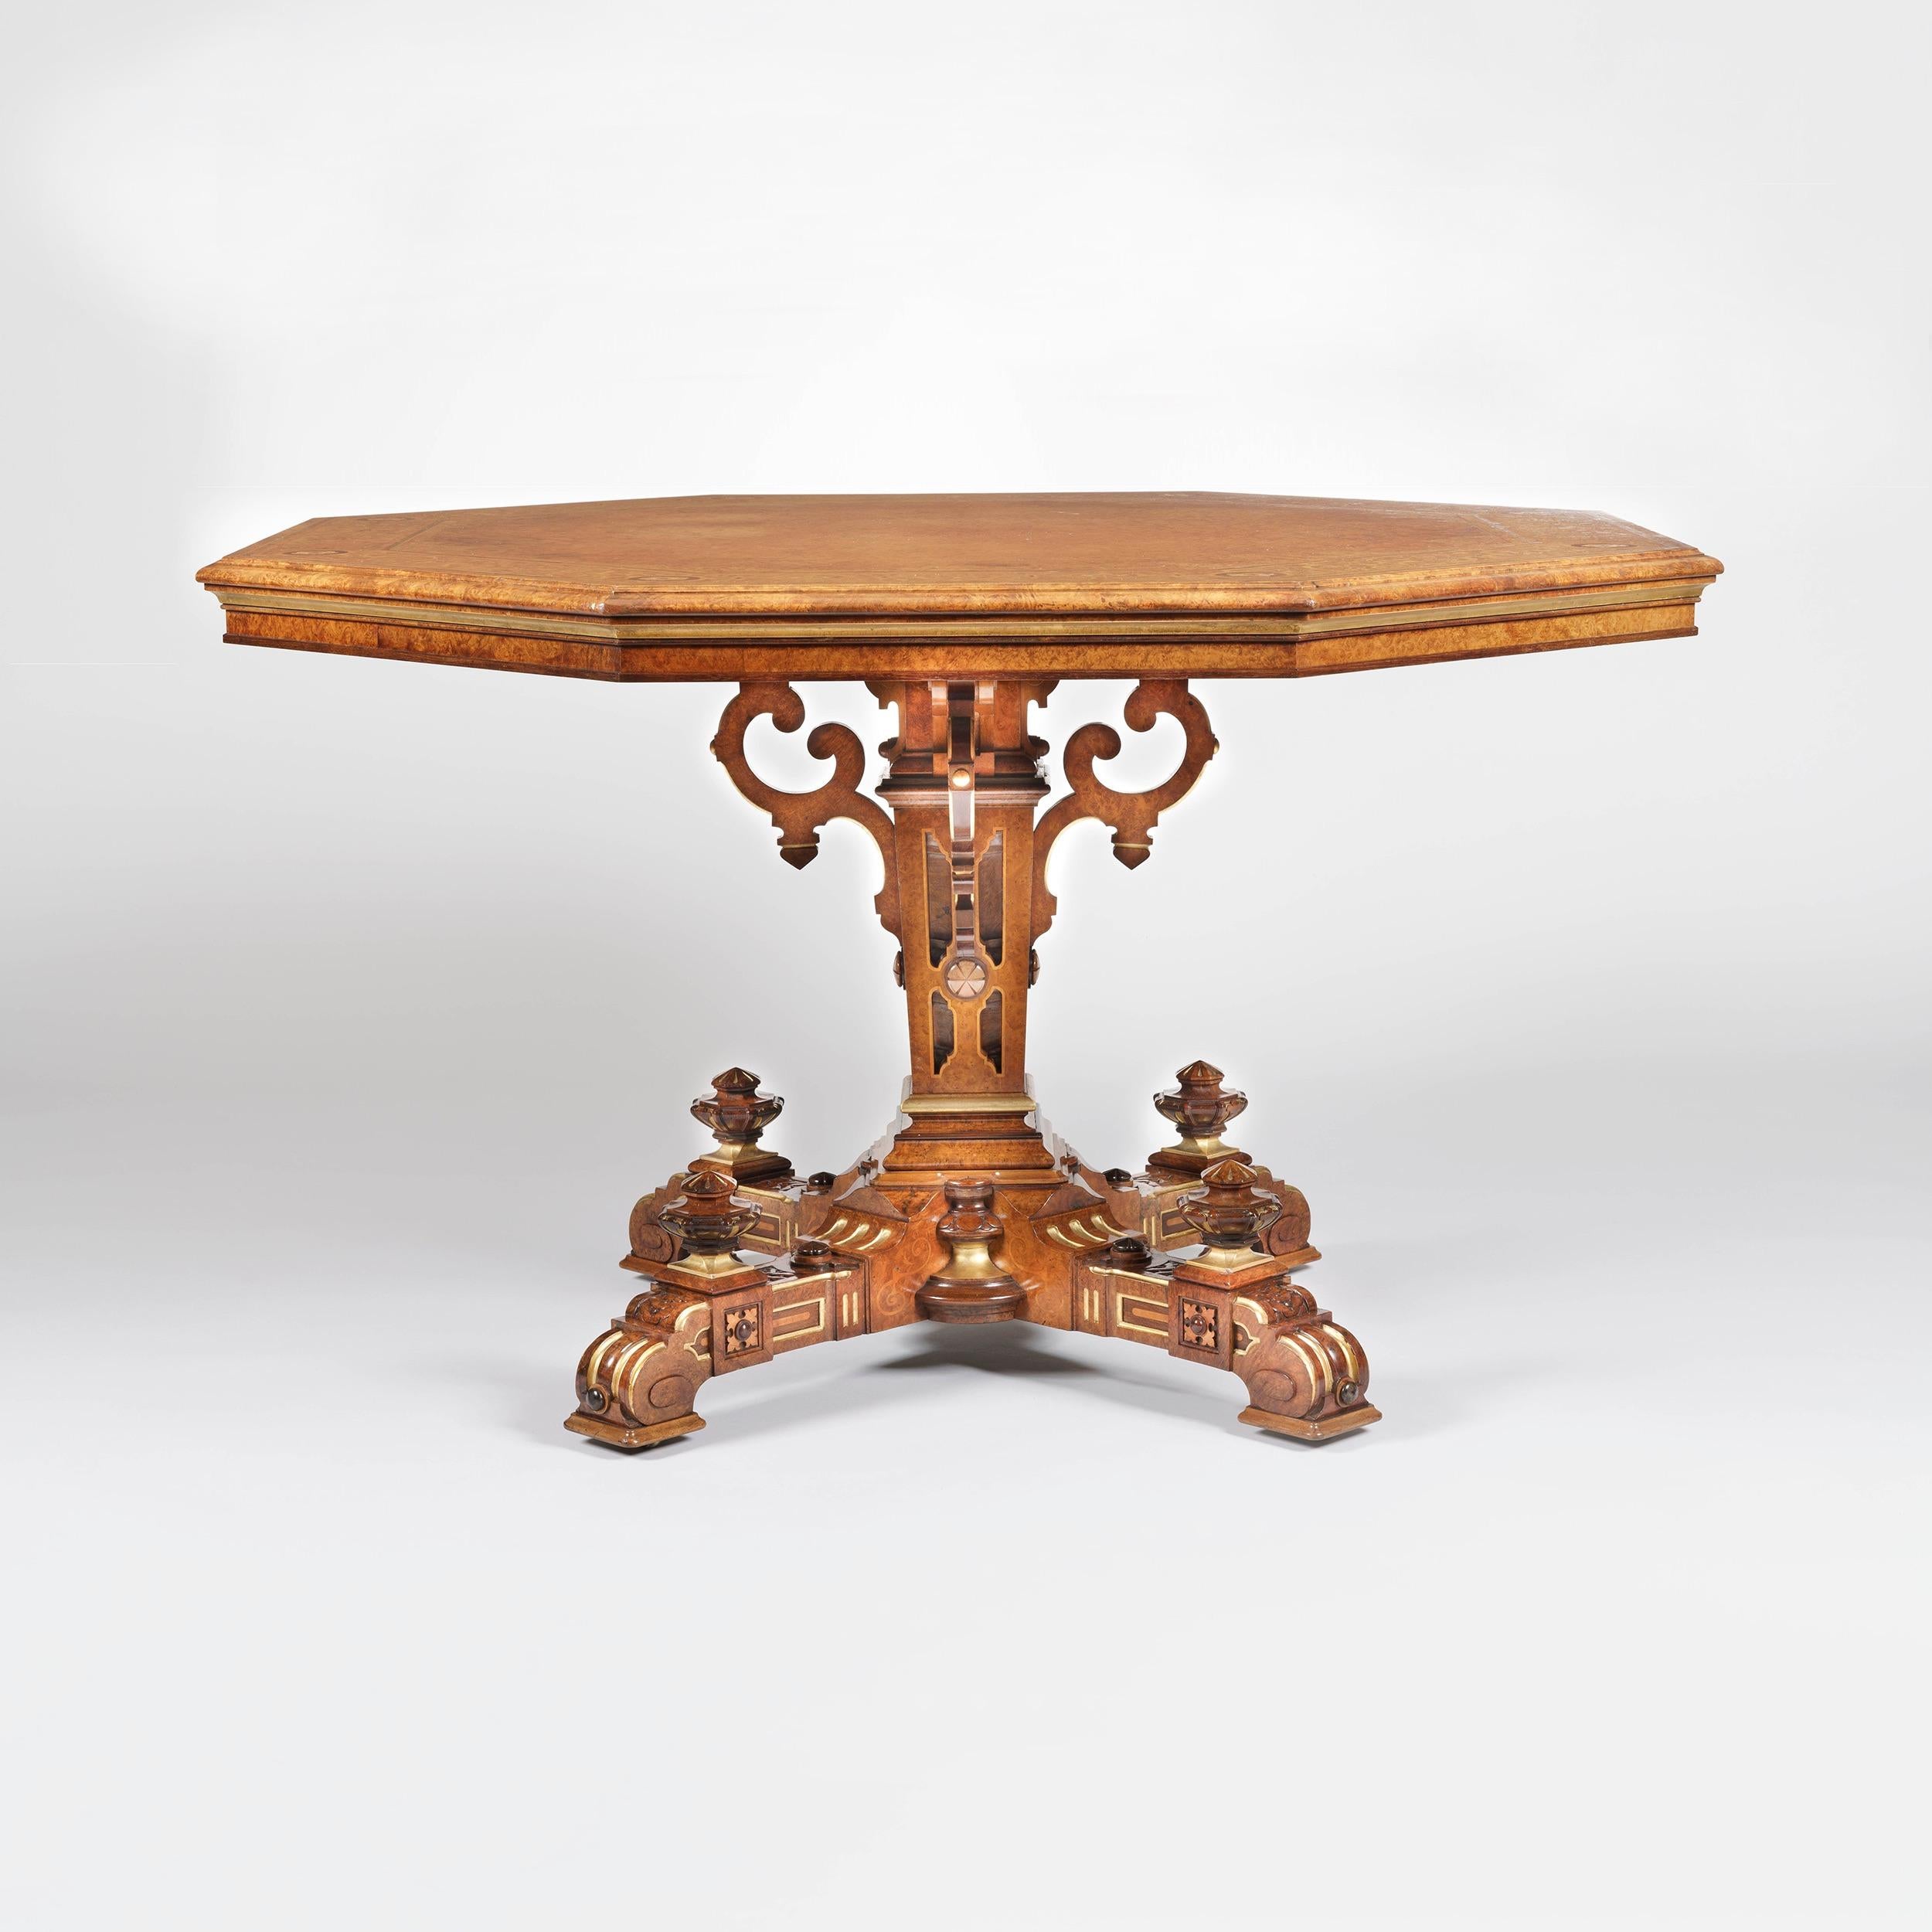 A good centre table
 by Johnstone & Jeanes of London
 
Constructed in amboyna, with extensive marquetry inlays in specimen woods, and enhanced with parcel-gilt highlights. Rising from a cruciform platform base adorned with knops and having concealed